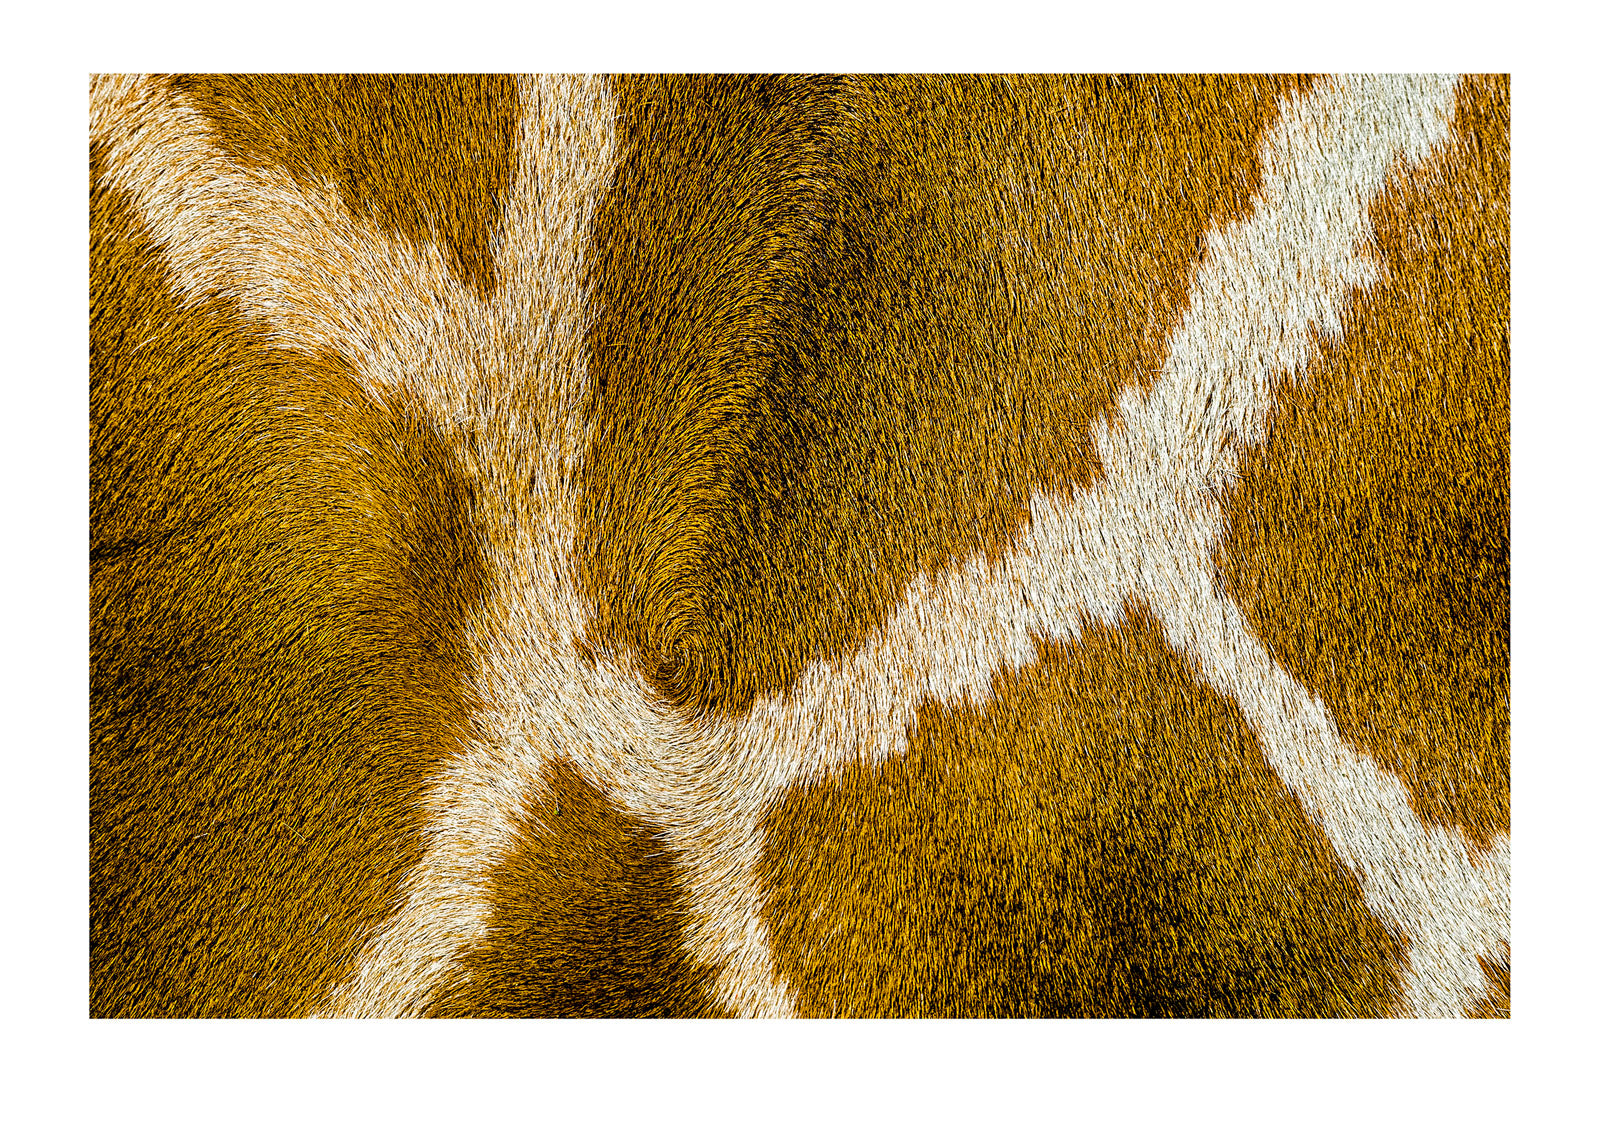 The reticulated mosaic fur pattern on the skin of a Giraffe flank. Sydney, New South Wales, Australia.